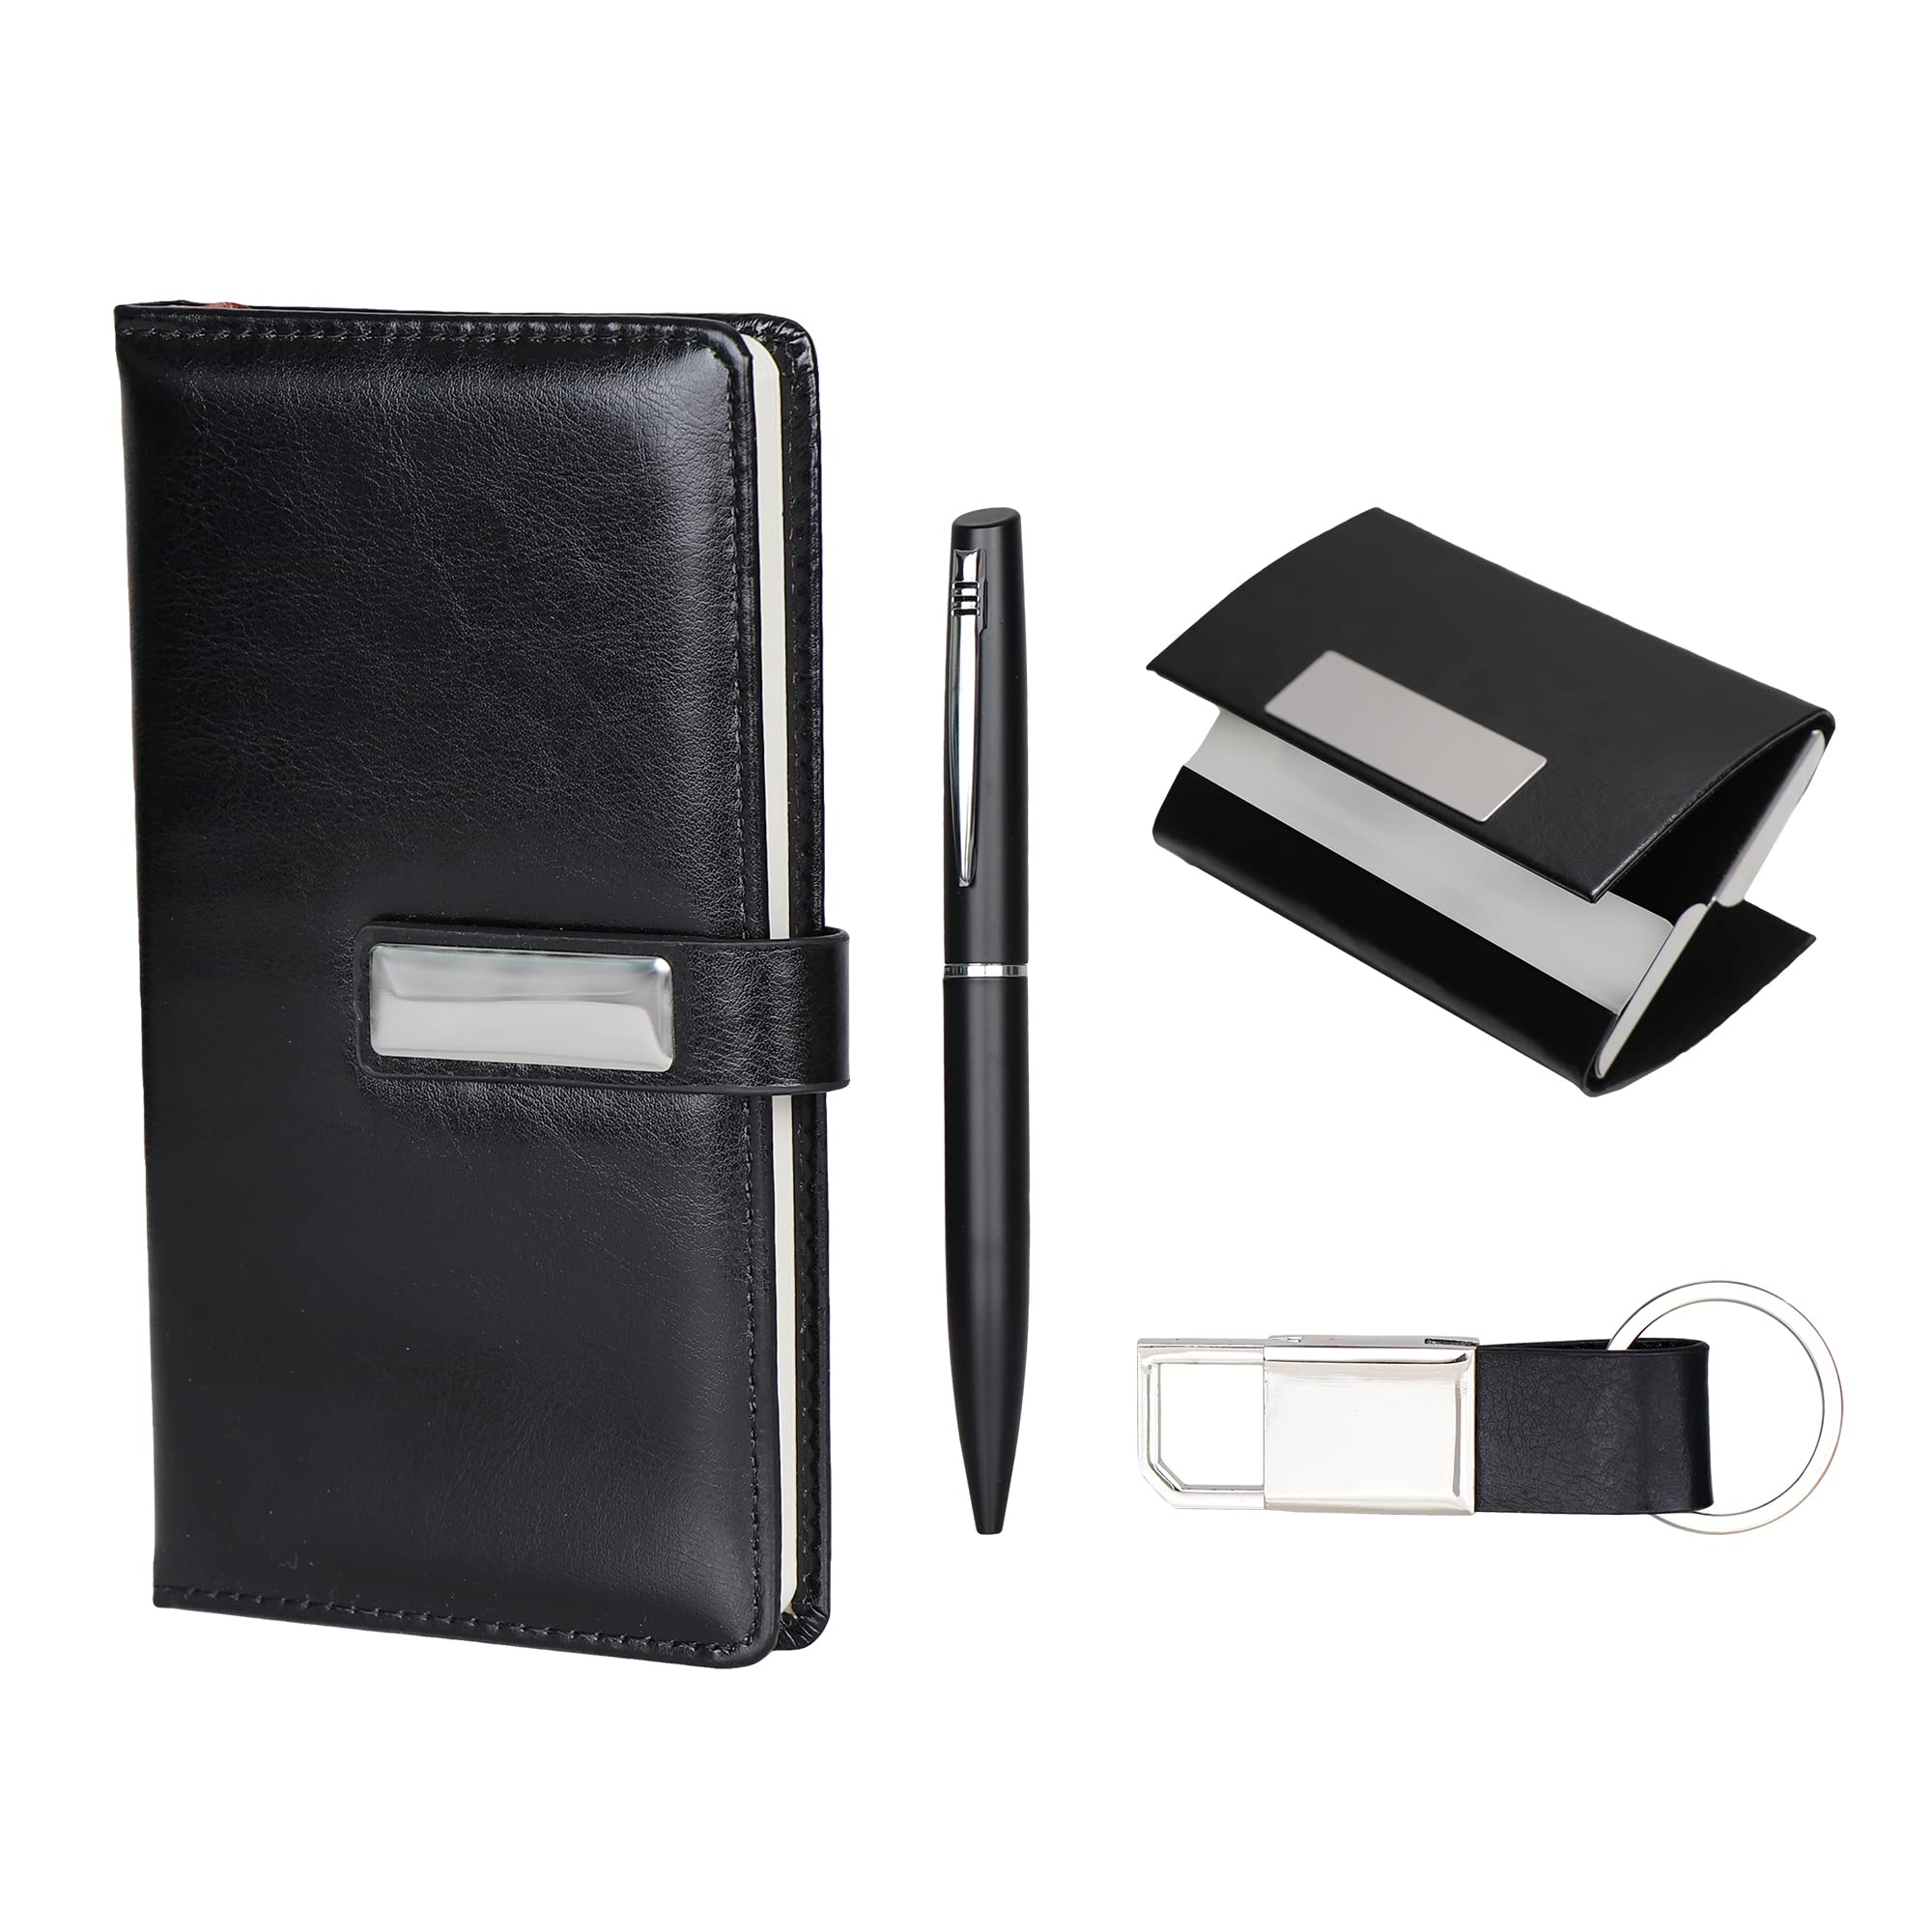 Hot Item] Business Gift Diary Notebook with Thermos Cup and Pen and USB  Business Gift Set with Logo